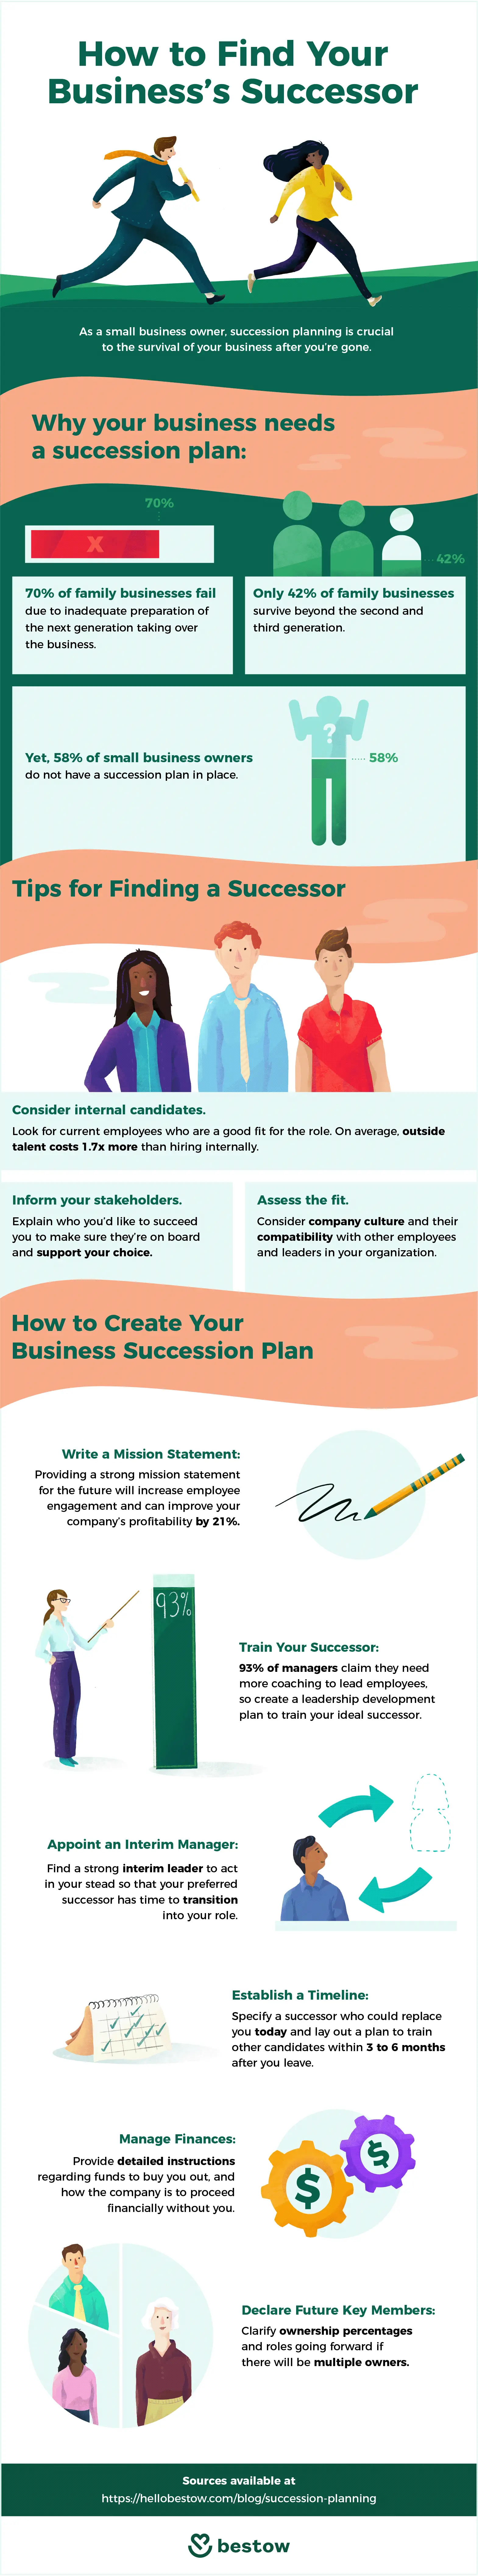  How to Find a Business Successor — Infographic 